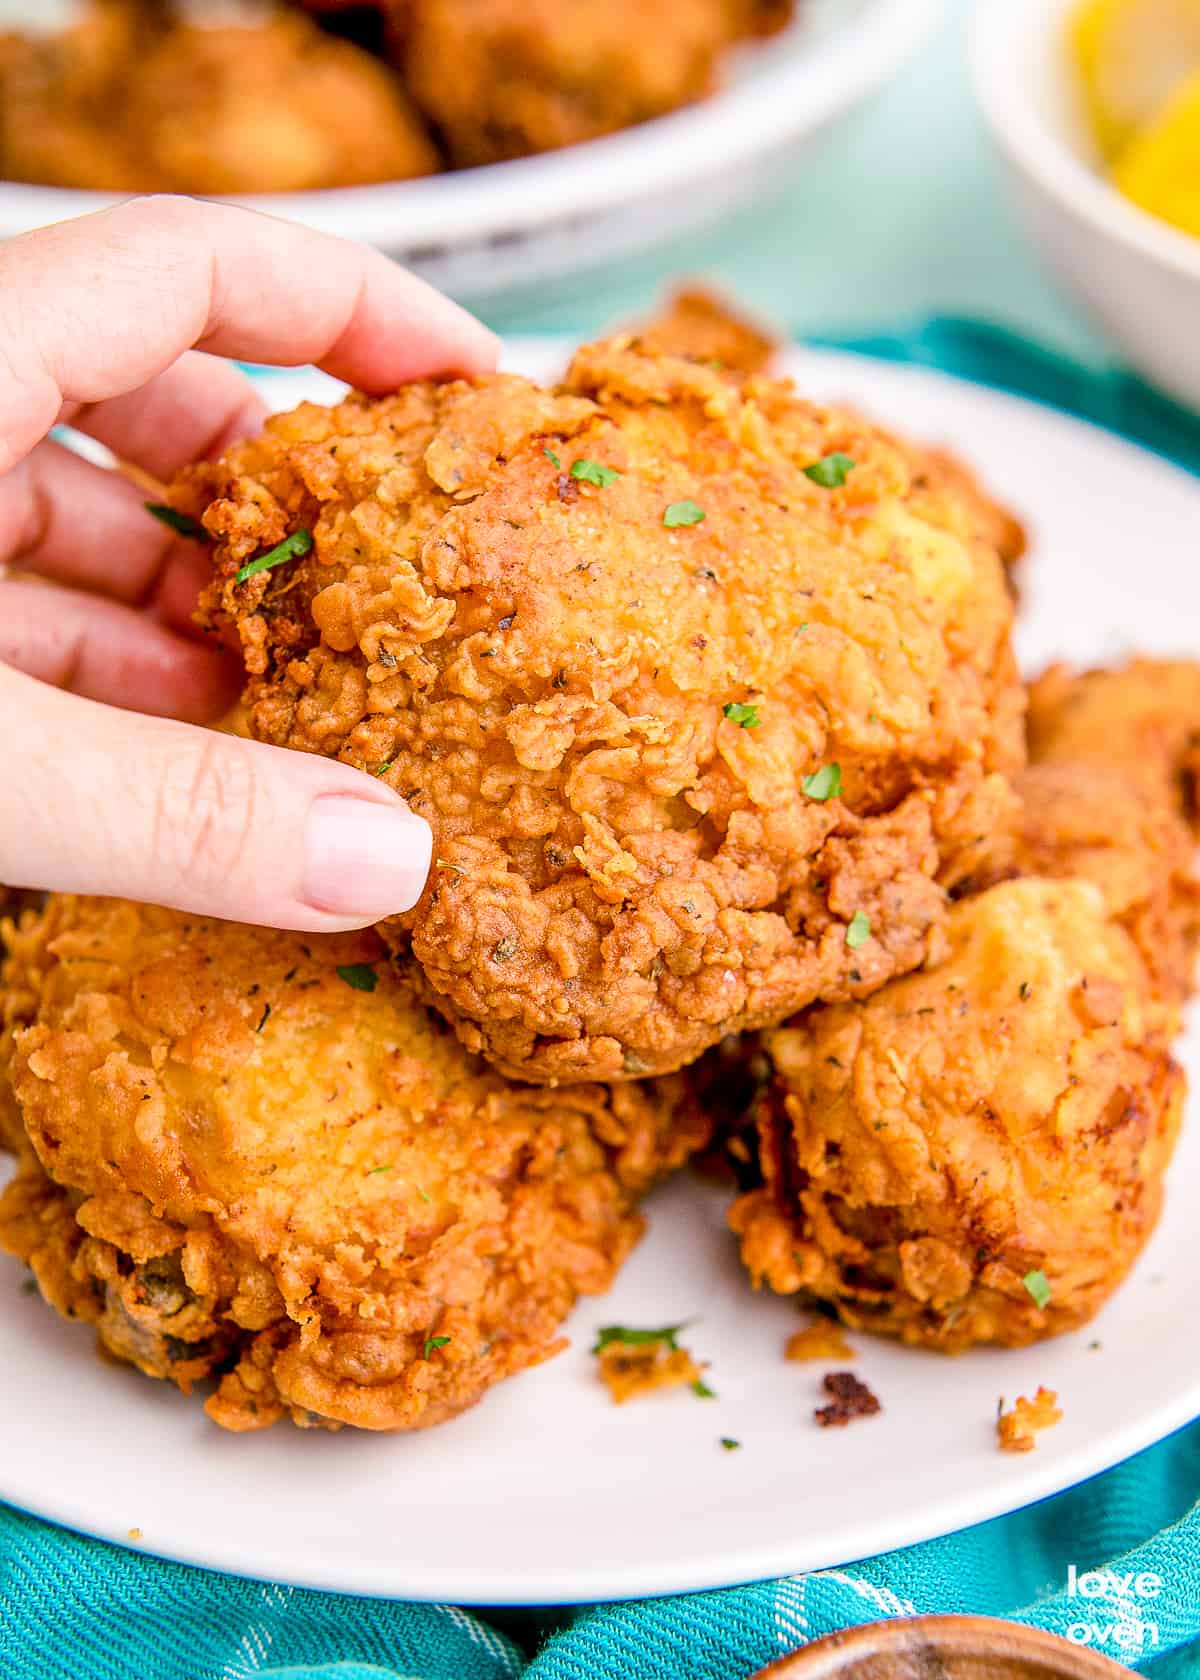 This Ingredient Will Make Your Fried Chicken Taste Like Heaven